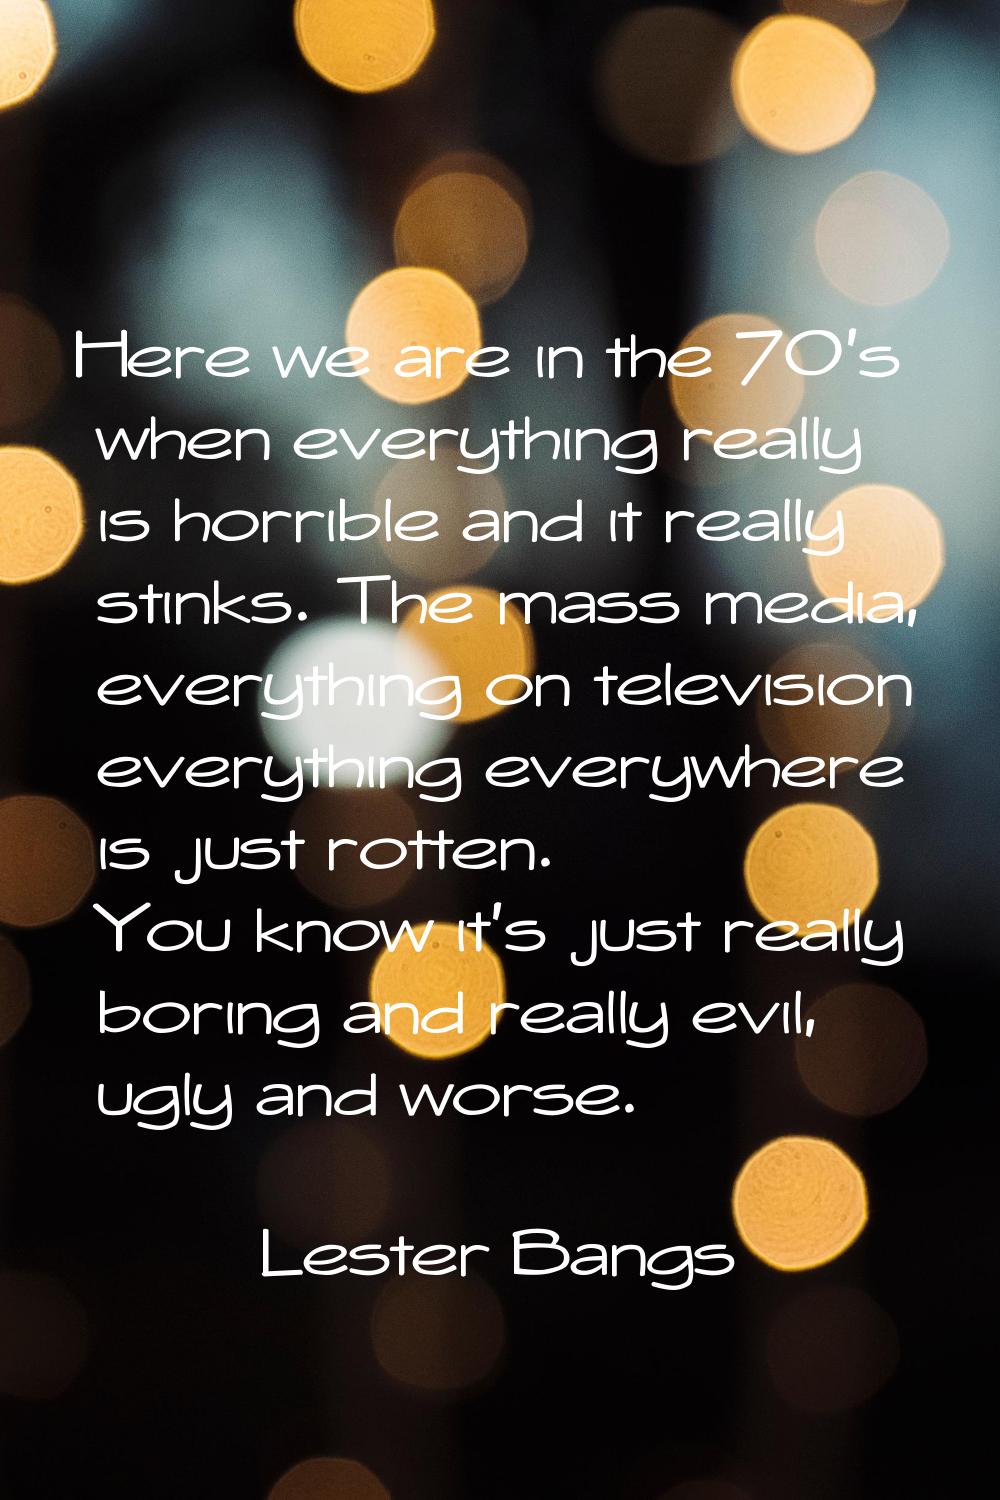 Here we are in the 70's when everything really is horrible and it really stinks. The mass media, ev